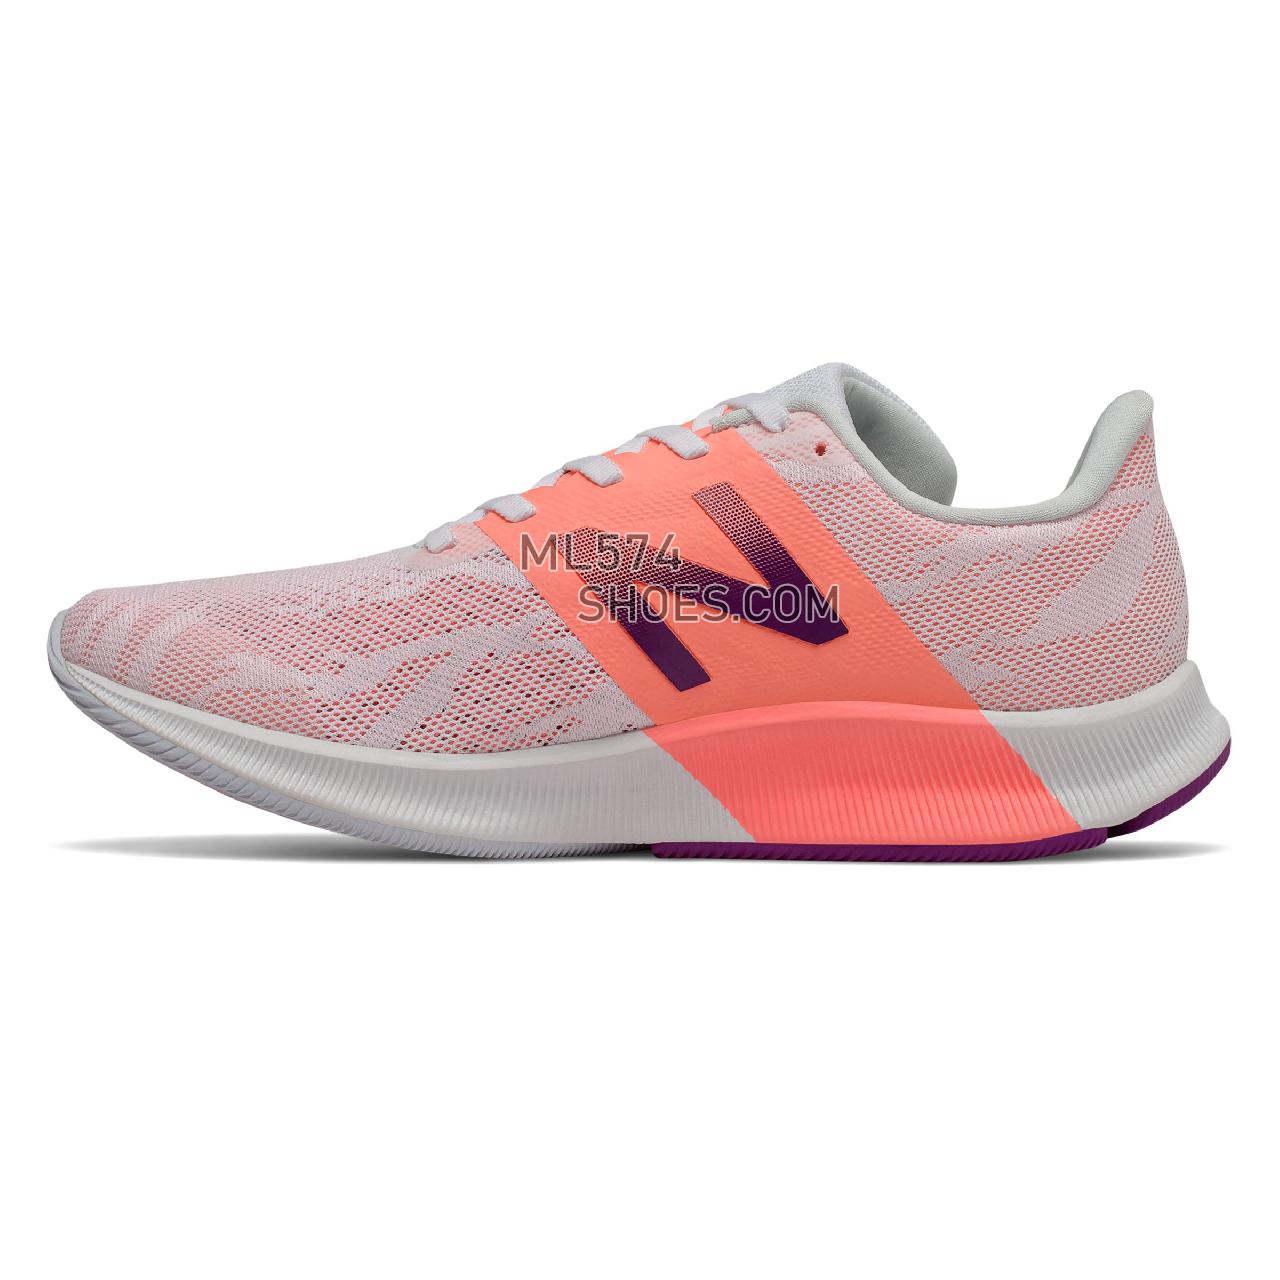 New Balance FuelCell 890v8 - Women's 800 Series - Moon Dust with Ginger Pink and Plum - W890SP8